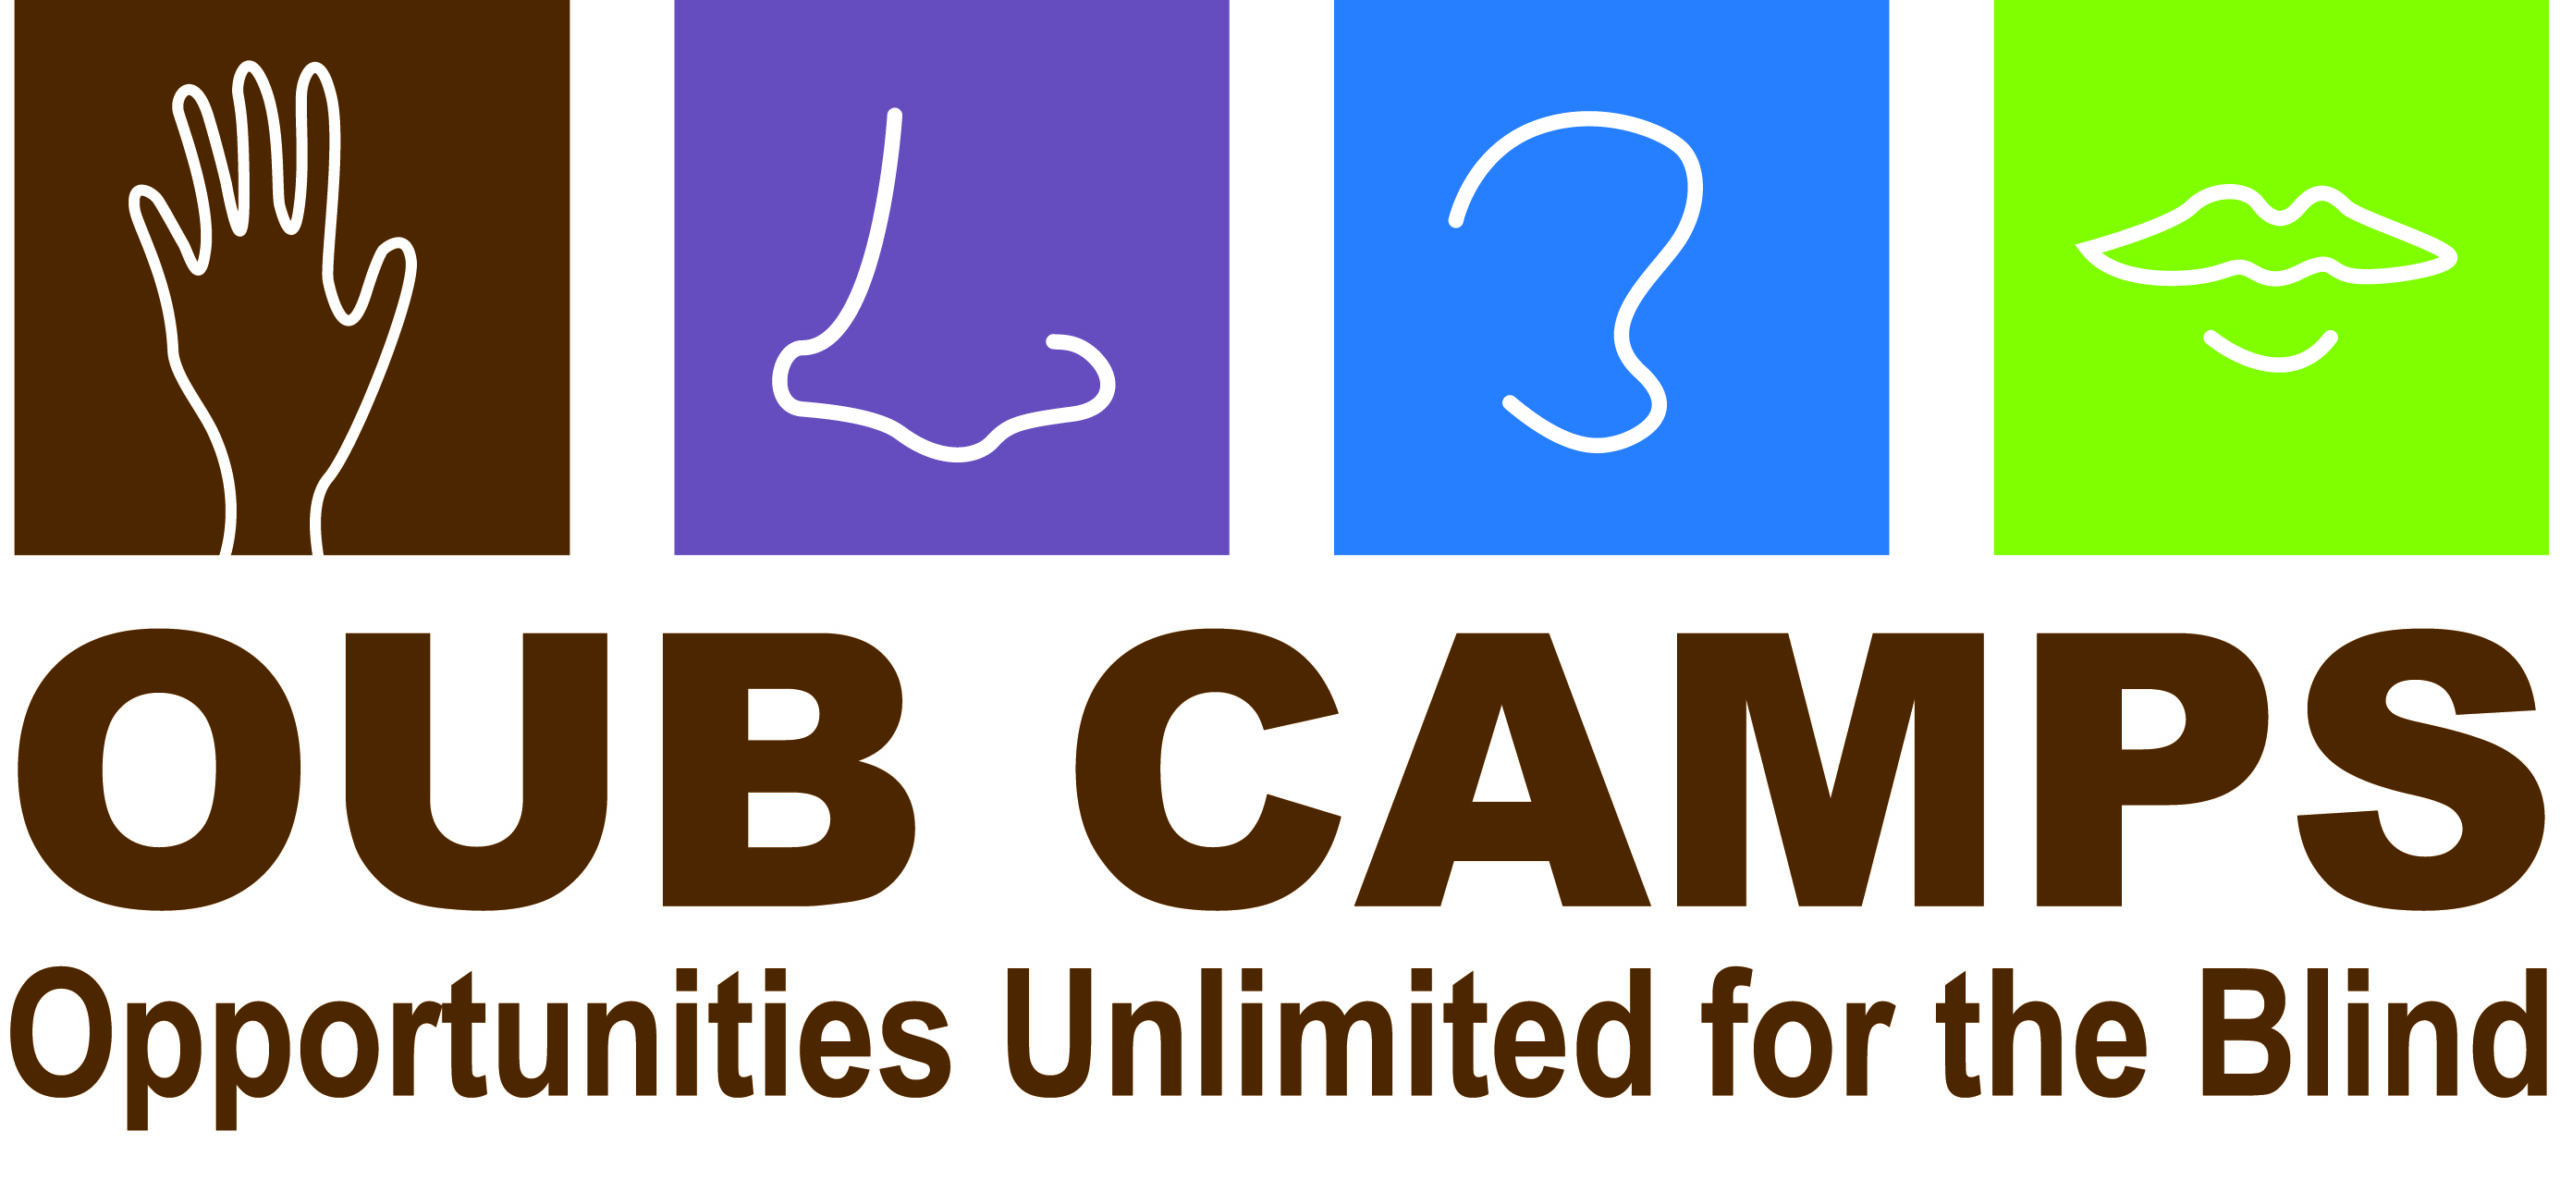 OUB Camps Logo Opporunities Unlimited for the blind